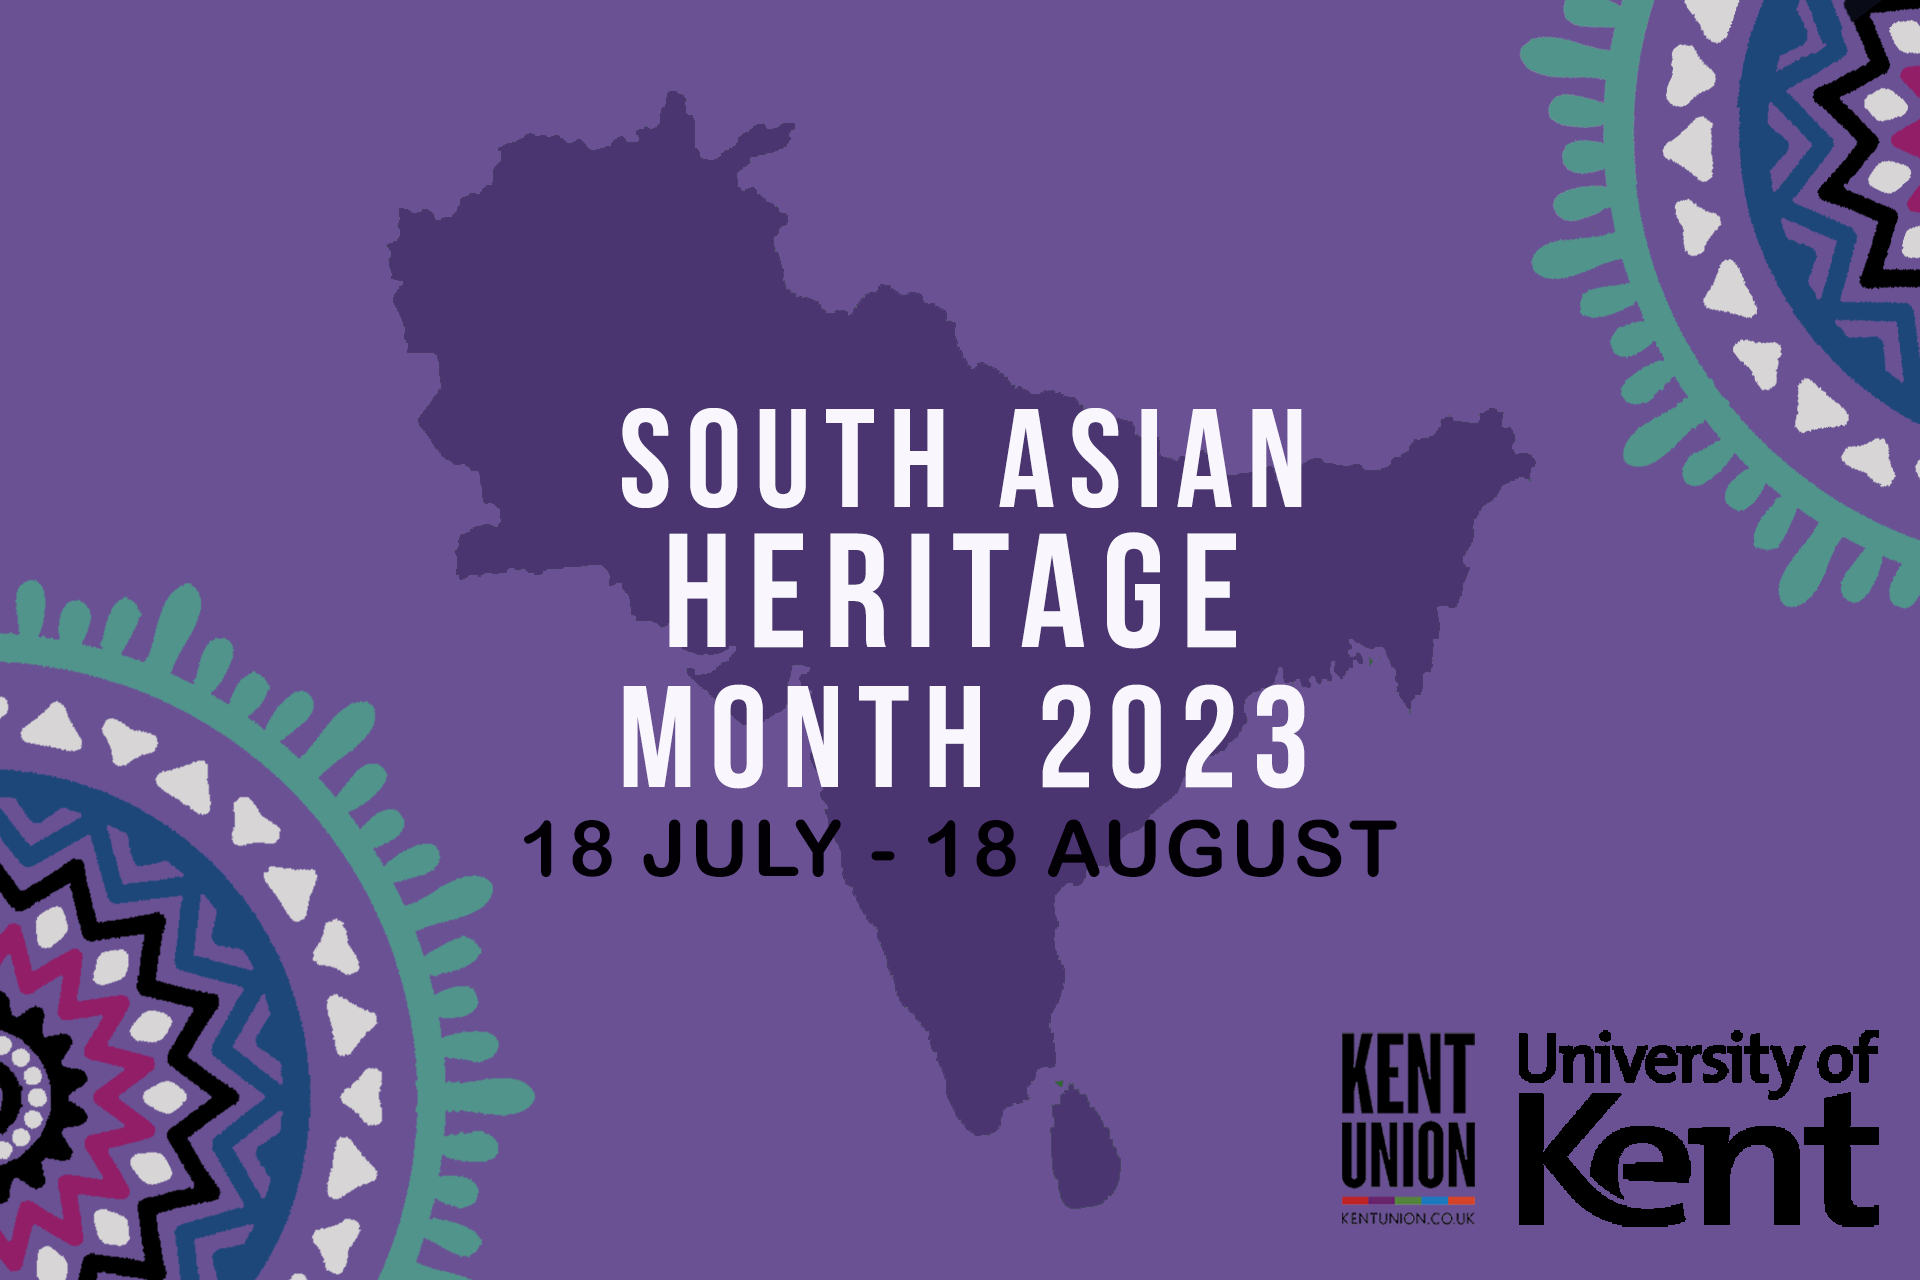 Banner for South Asian Heritage Month, Uni of Kent and Student Union logos, map of South Asia as background, text reads: 